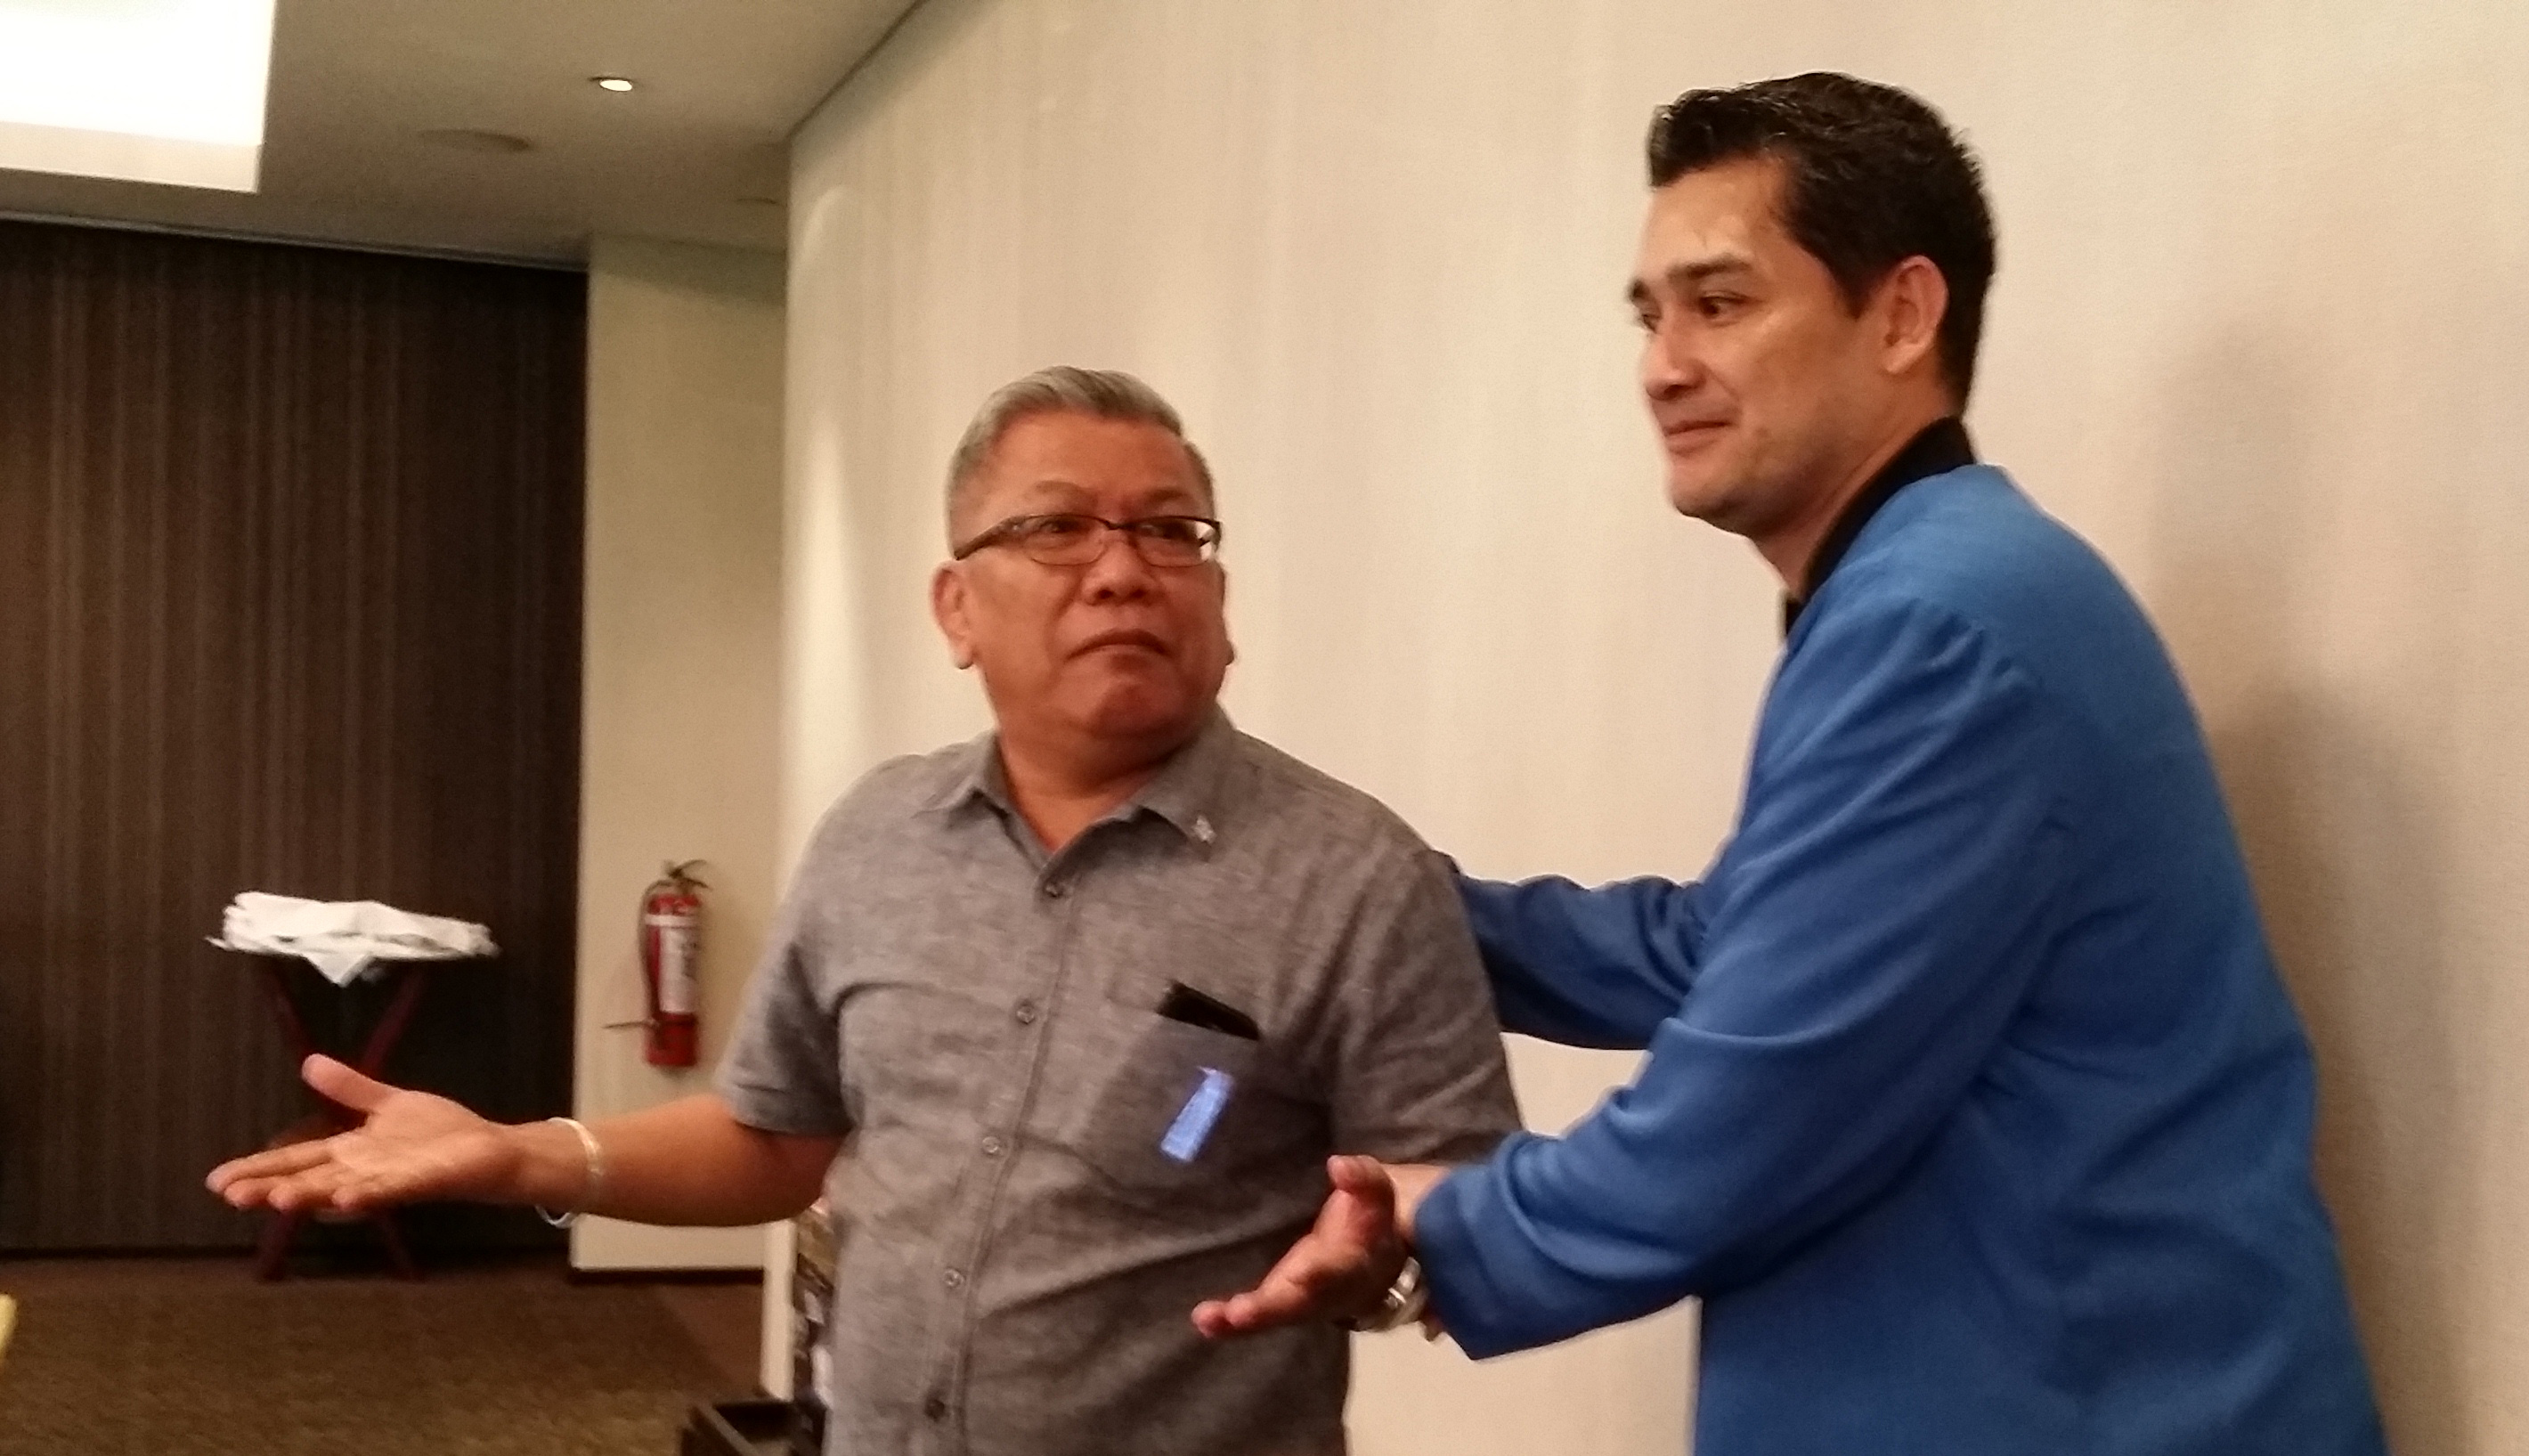 Ponce tests the hotel's readiness to assist PWDs during disasters by pretending to be deaf.